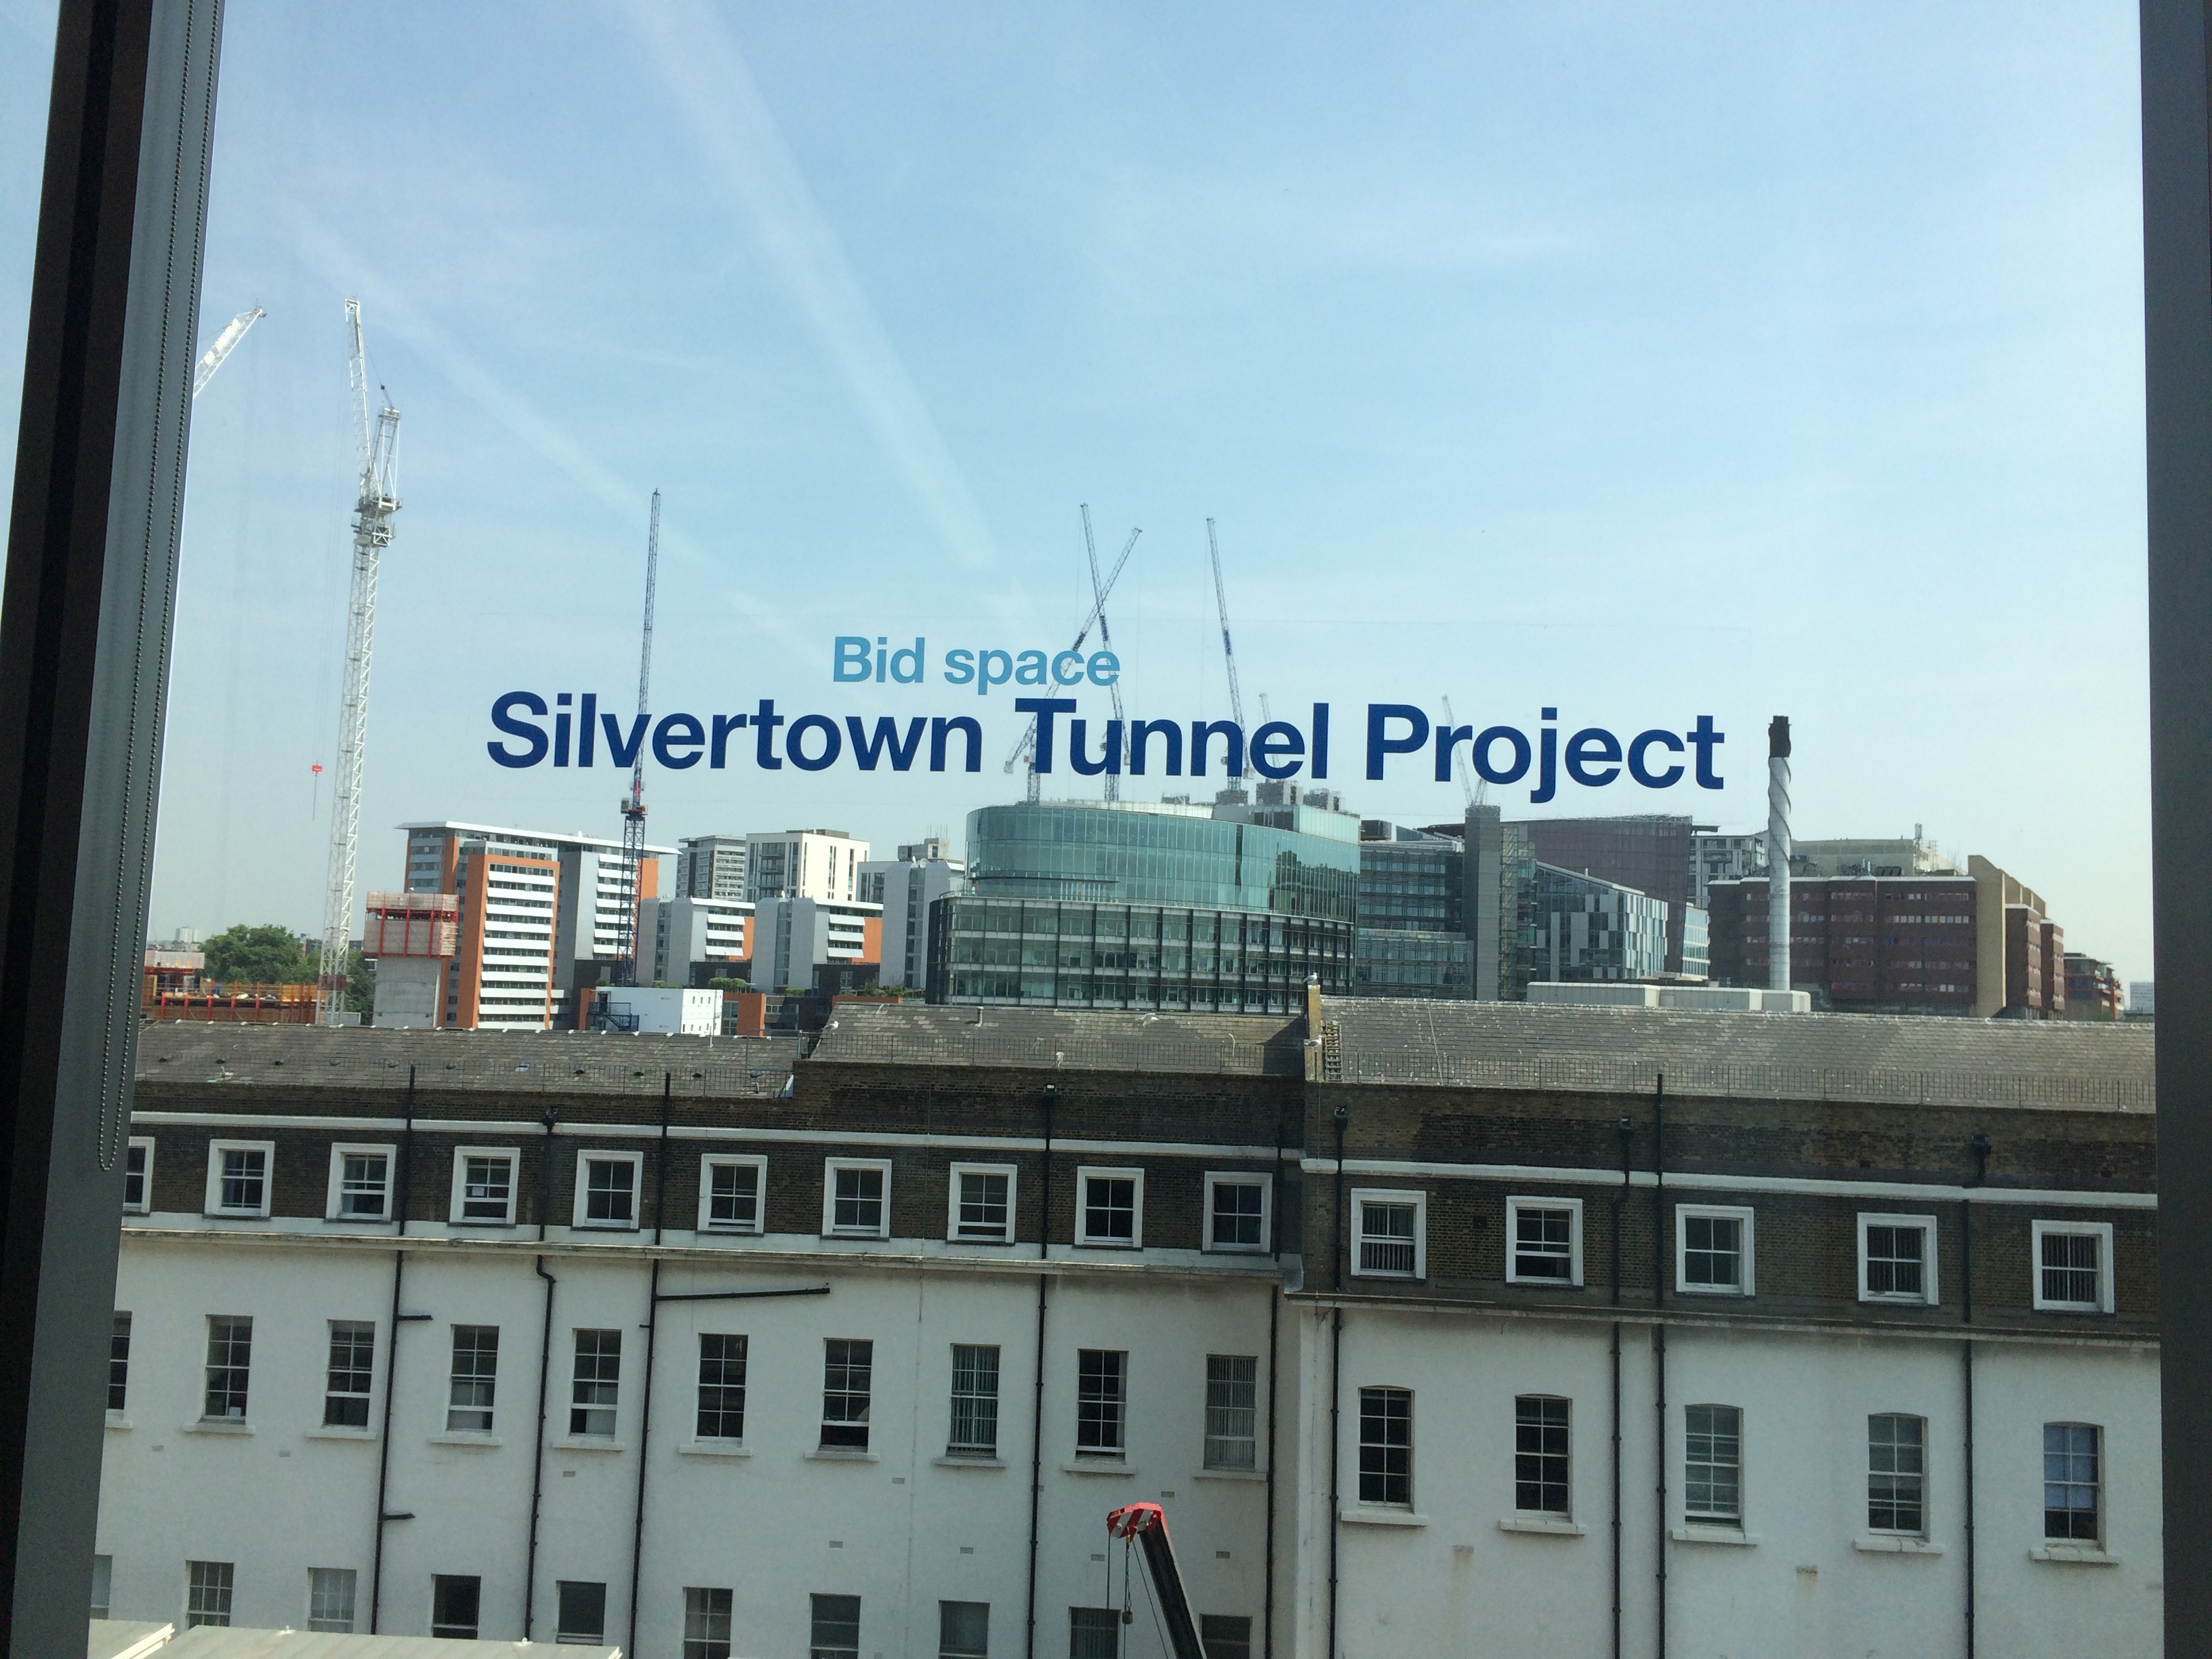 Silvertown Tunnel Project